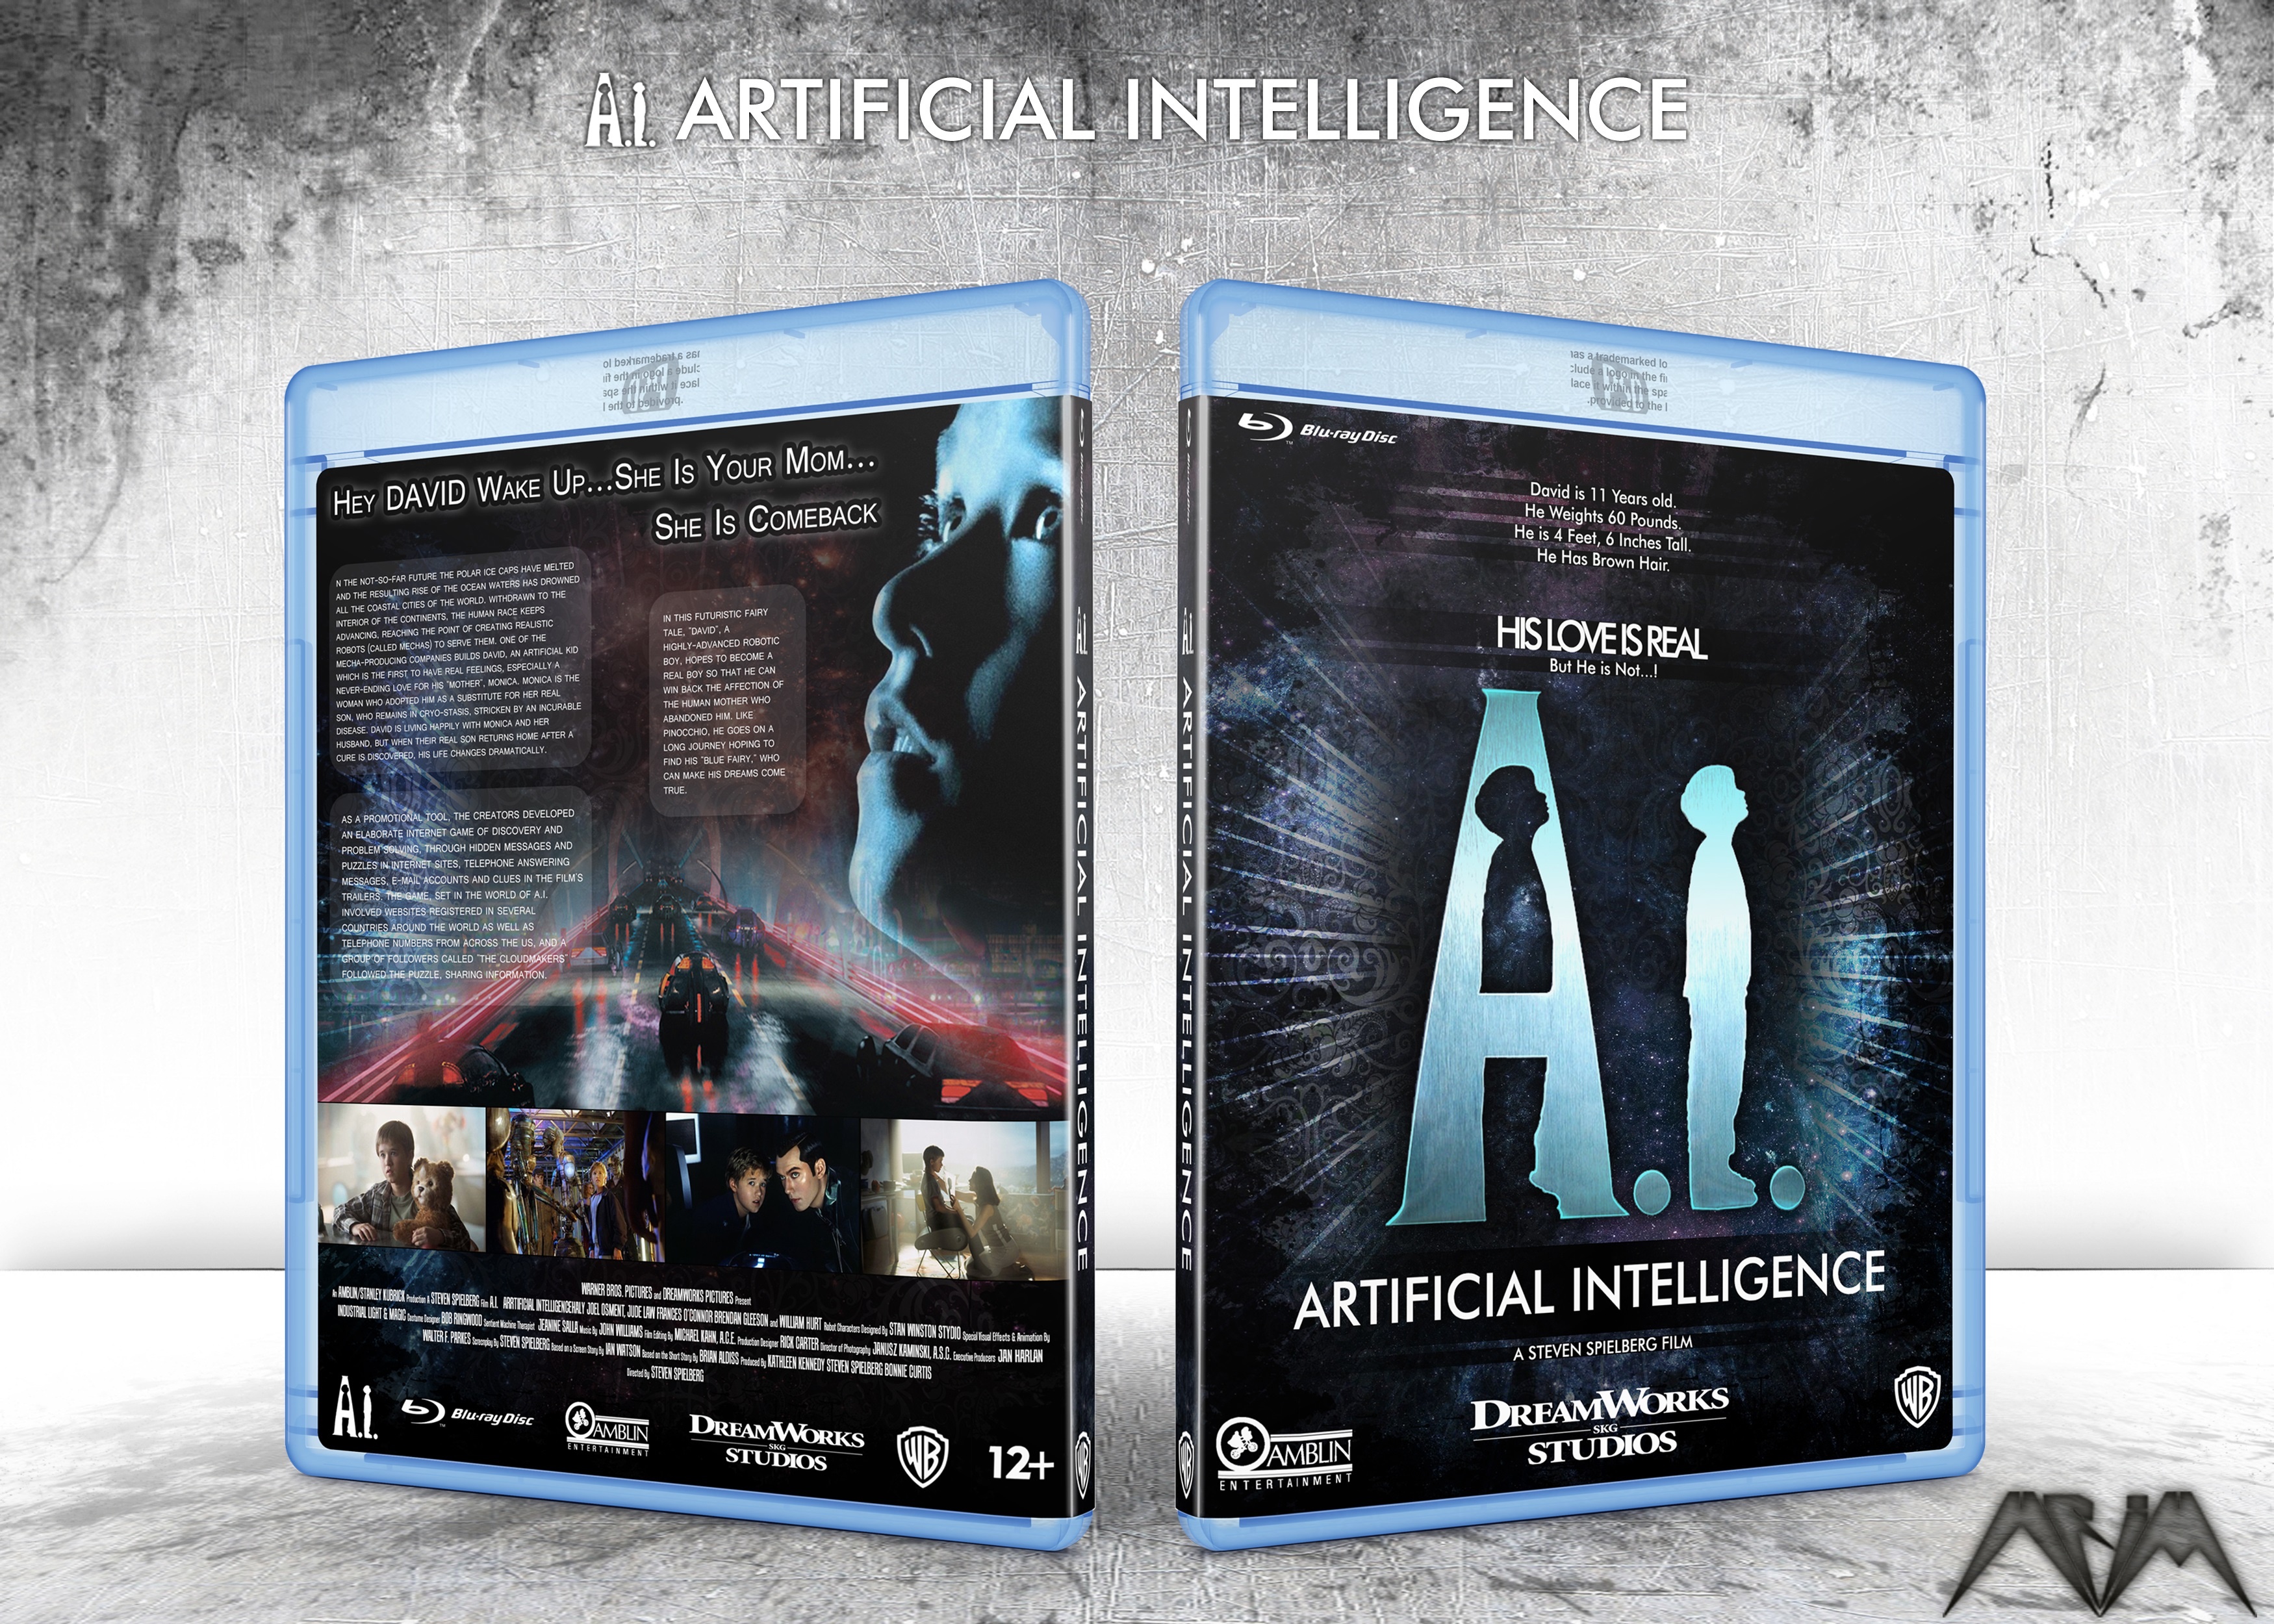 A.I. Artificial Intelligence box cover